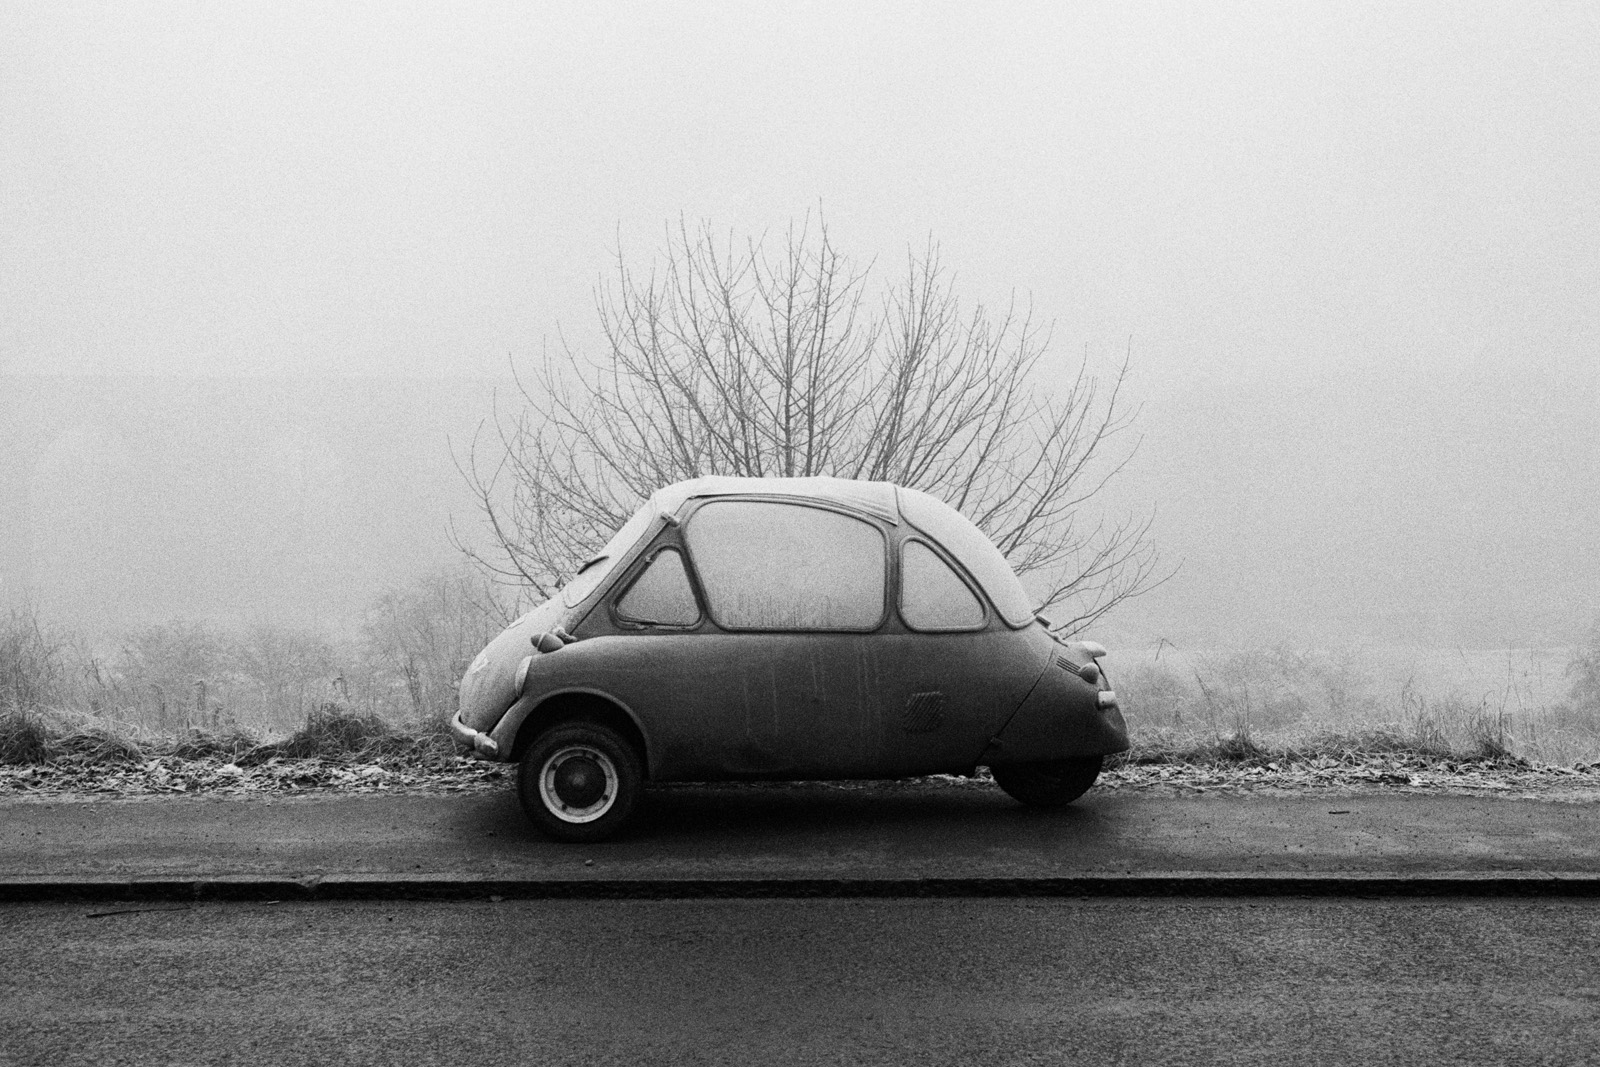 GB. England. Elland. From 'Bad Weather'. December. 1978.